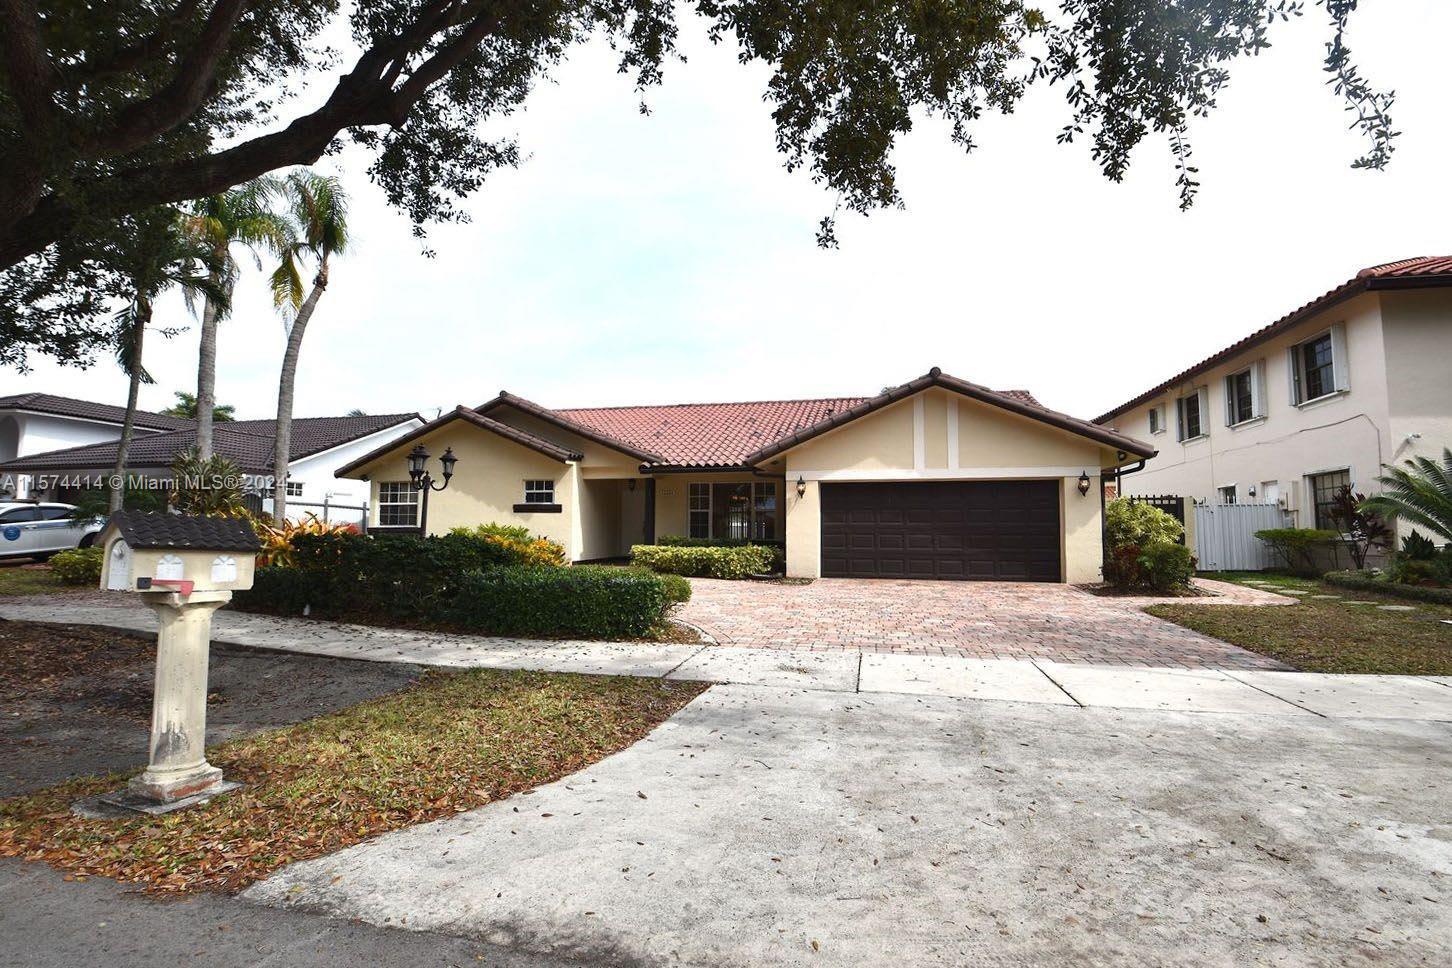 Photo of 16501 NW 84th Ct in Miami Lakes, FL